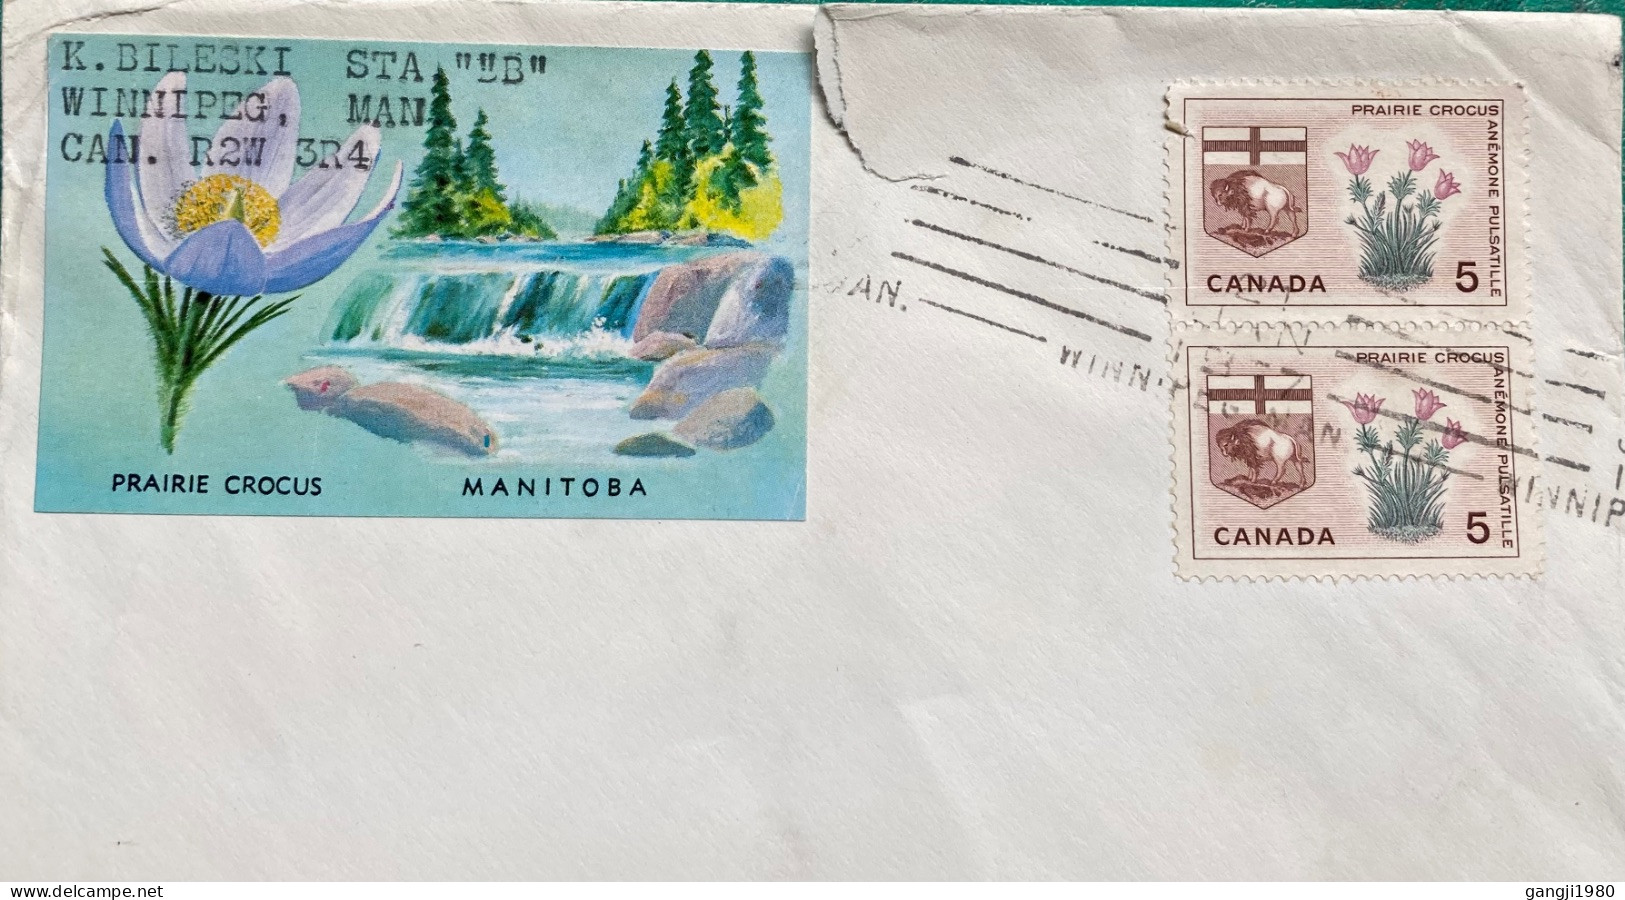 CANADA 1967, COVER USD TO USA, PROVINCE BADLE FLOWER, ANIMAL, NATURE, WATERFALL, 2 STAMP, WINNIPG CITY, BAR CANCEL. - Cartas & Documentos